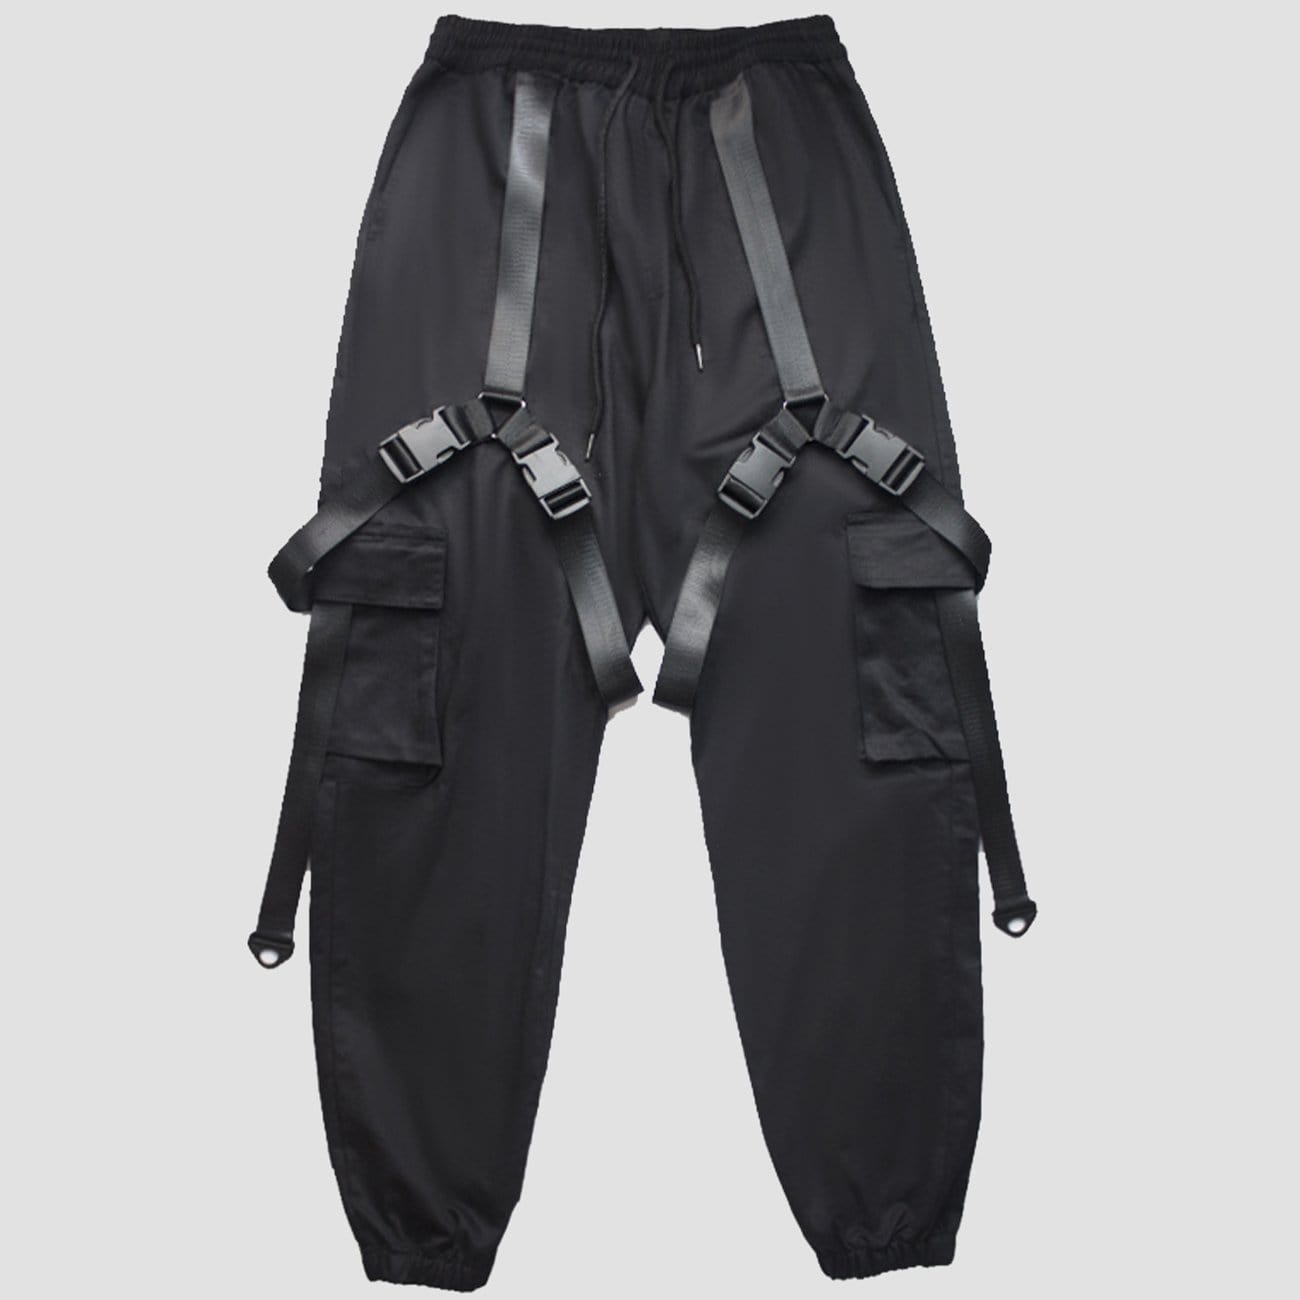 TO Combat Techwear Ribbons Buckle Cargo Pants